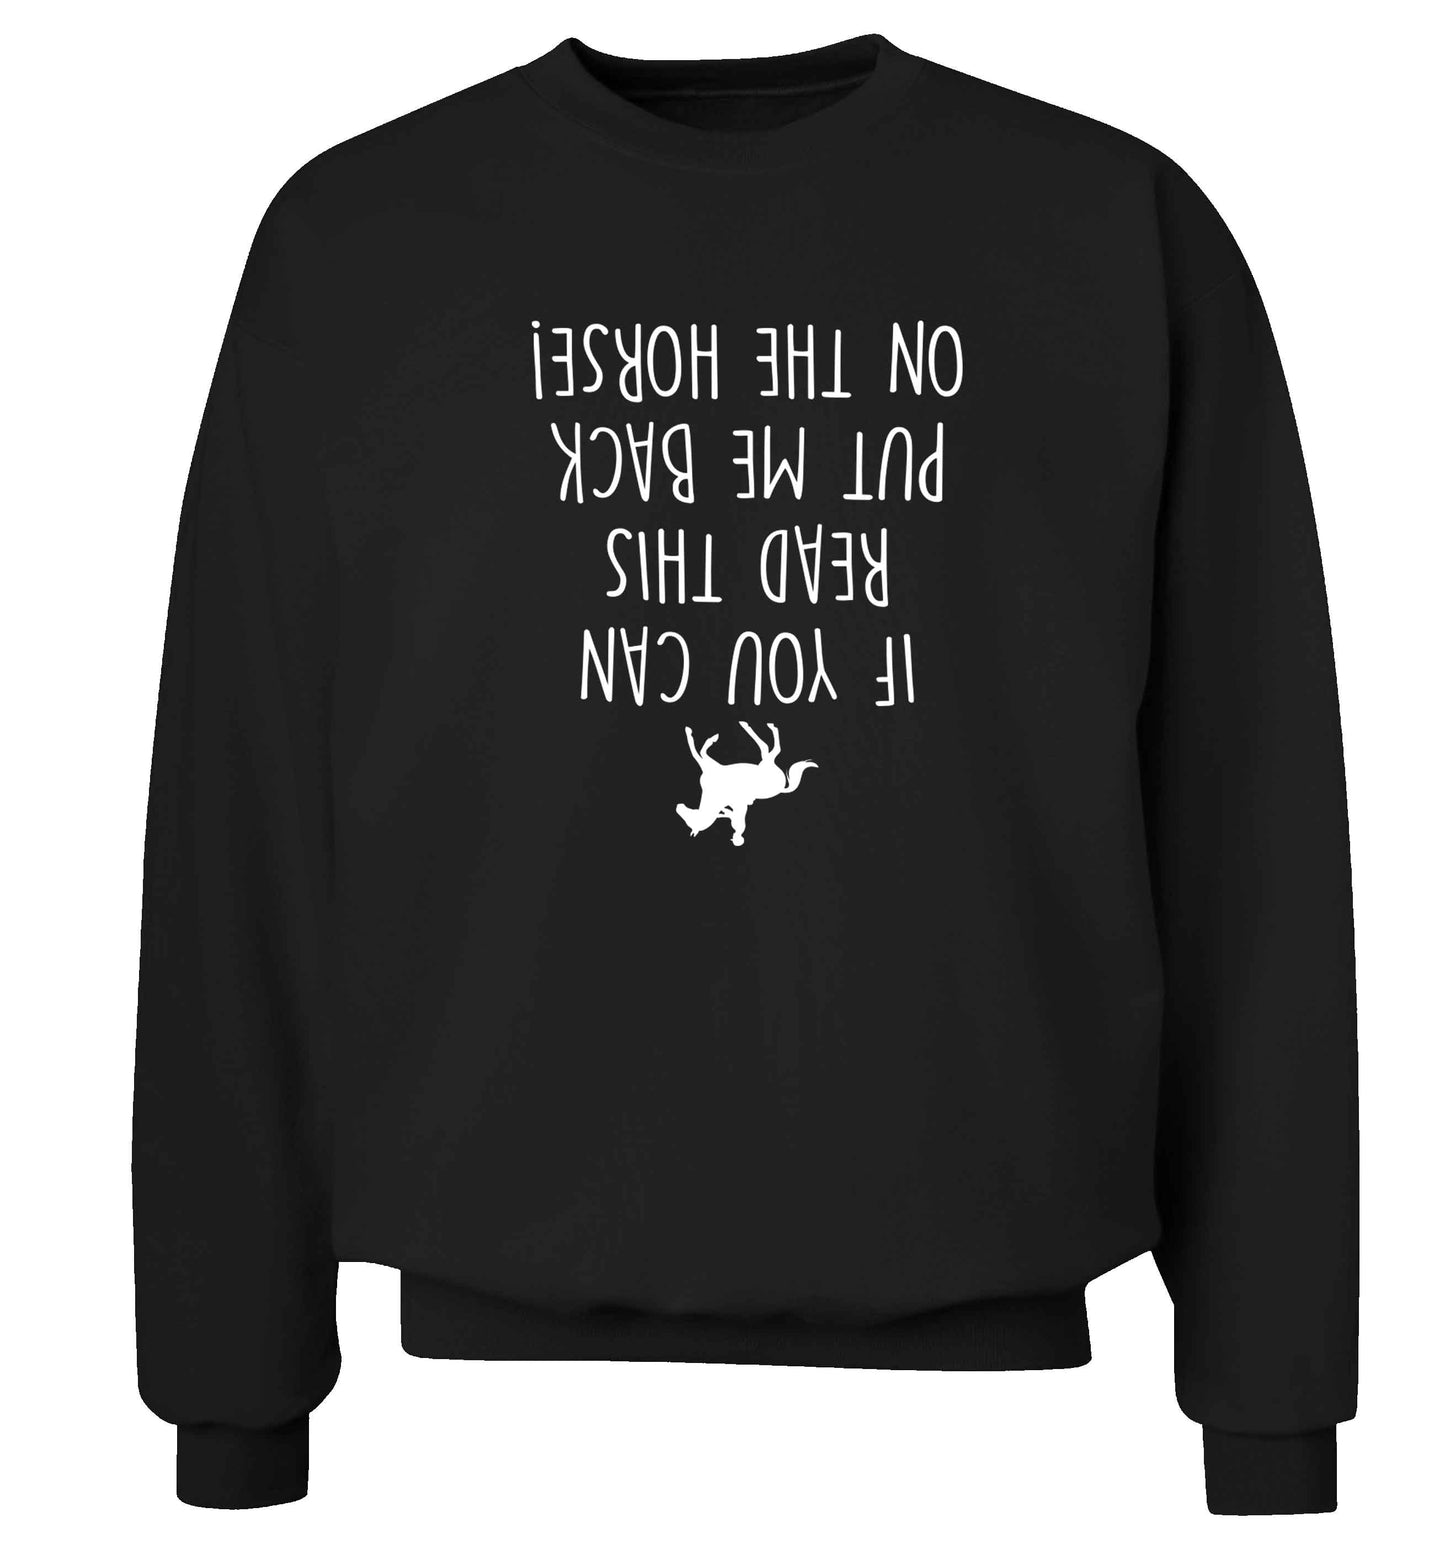 If you can read this put me back on the horse adult's unisex black sweater 2XL